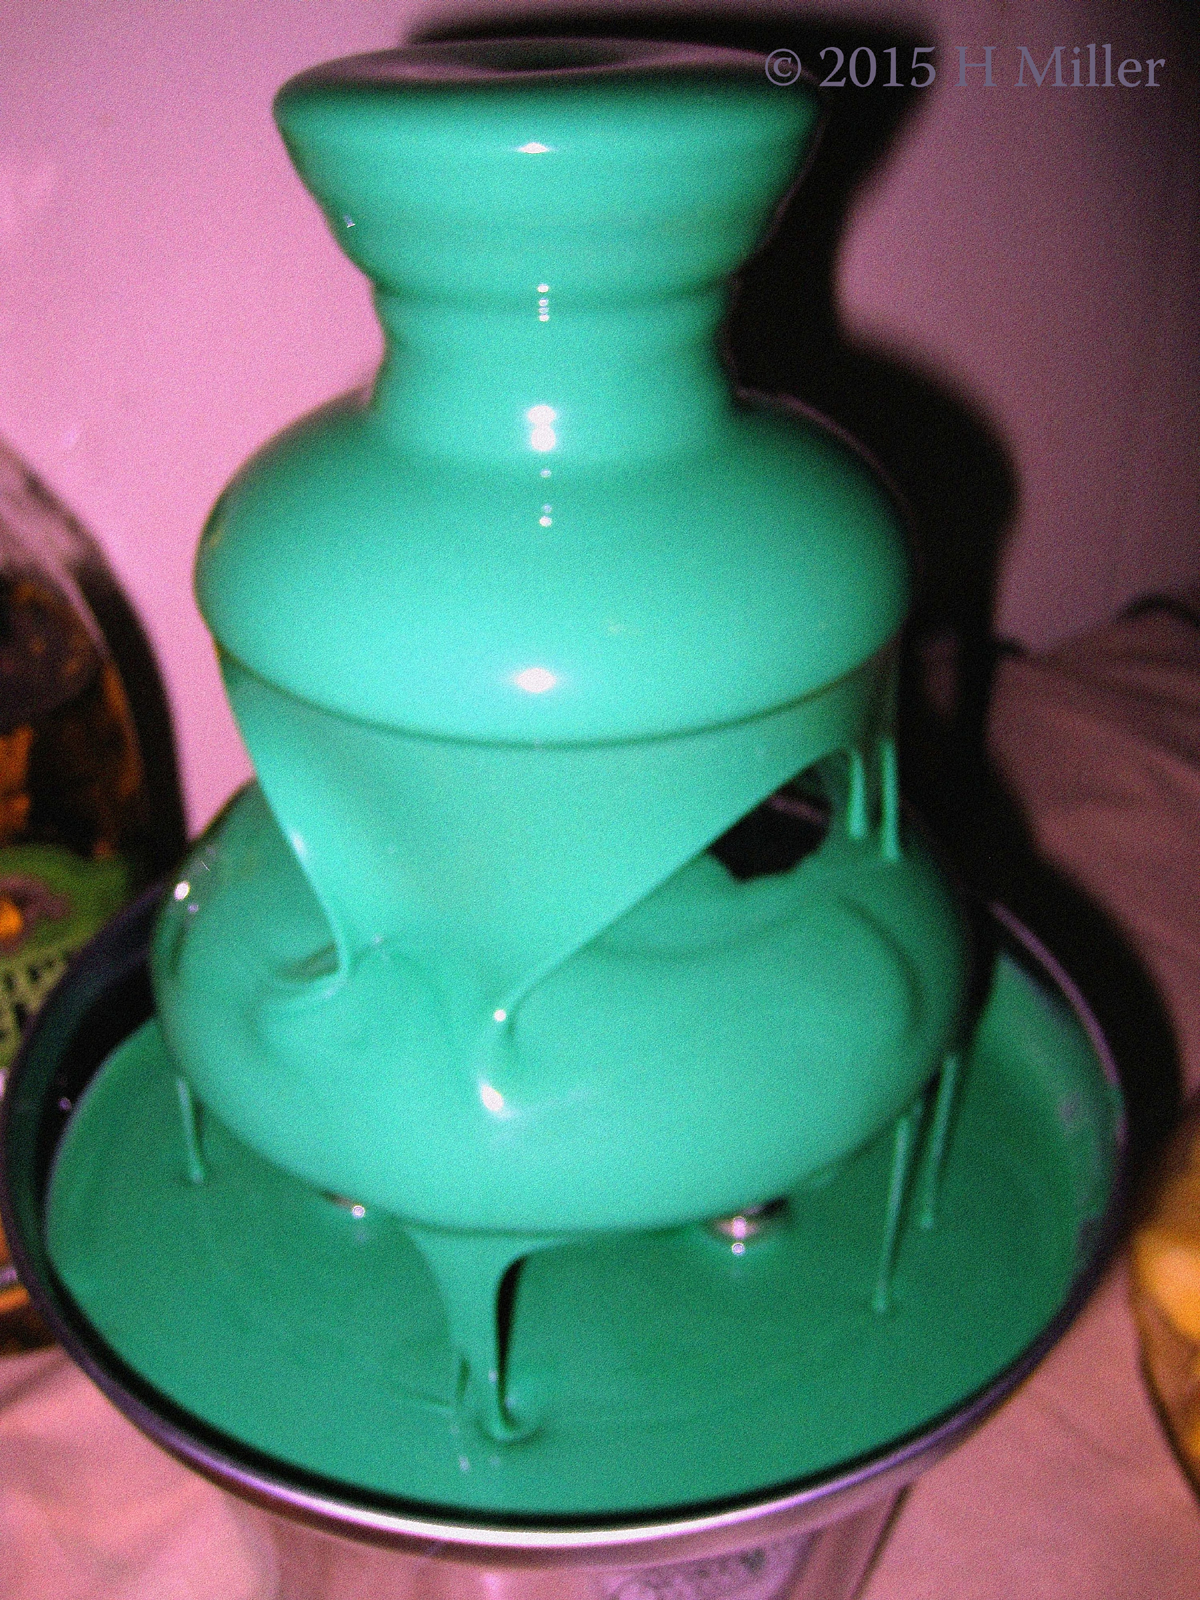 Chocolate Fountain With GREEN Chocolate! What...